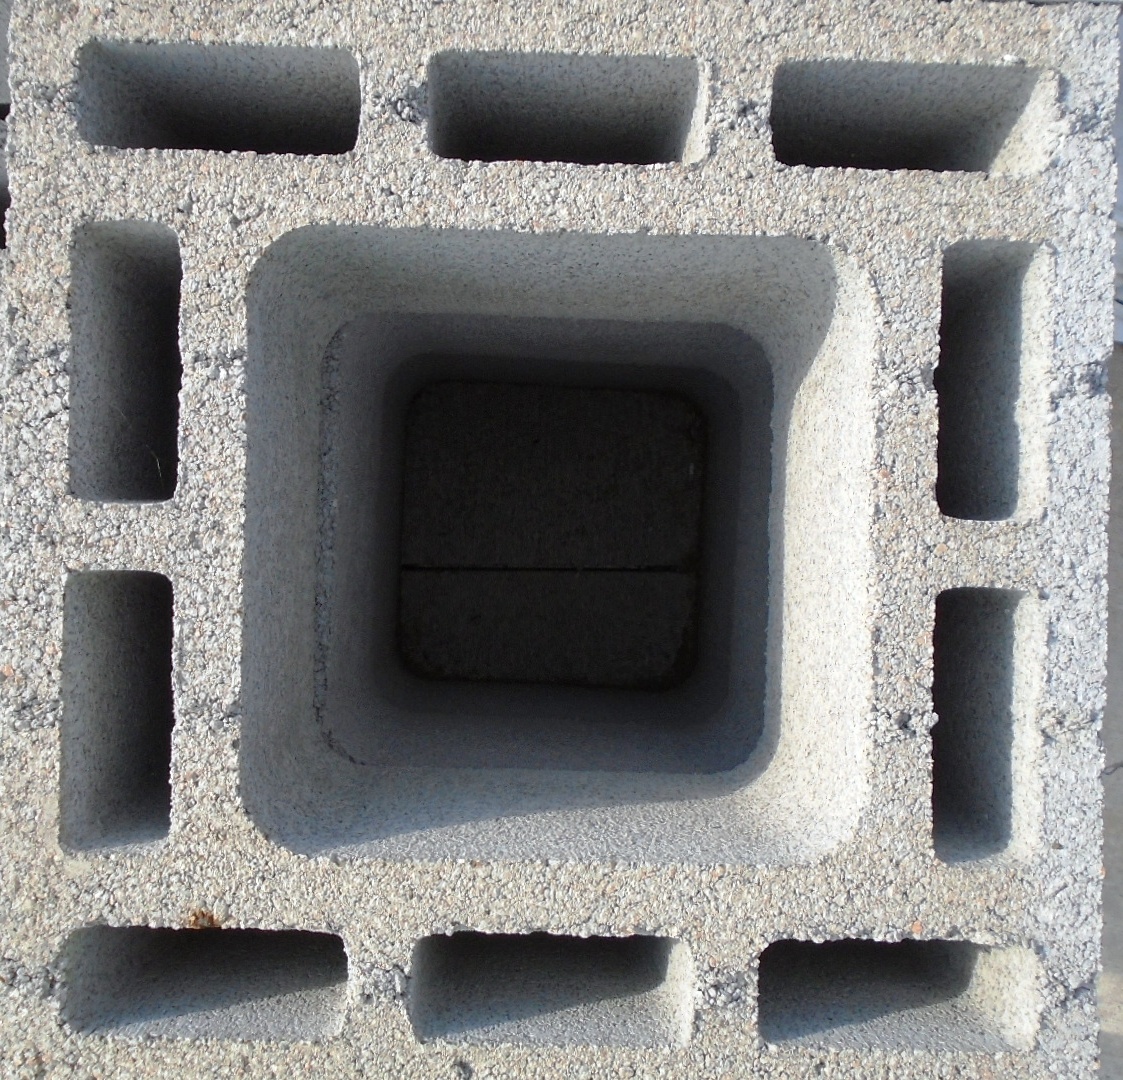 Chimney Block and Flue Liners